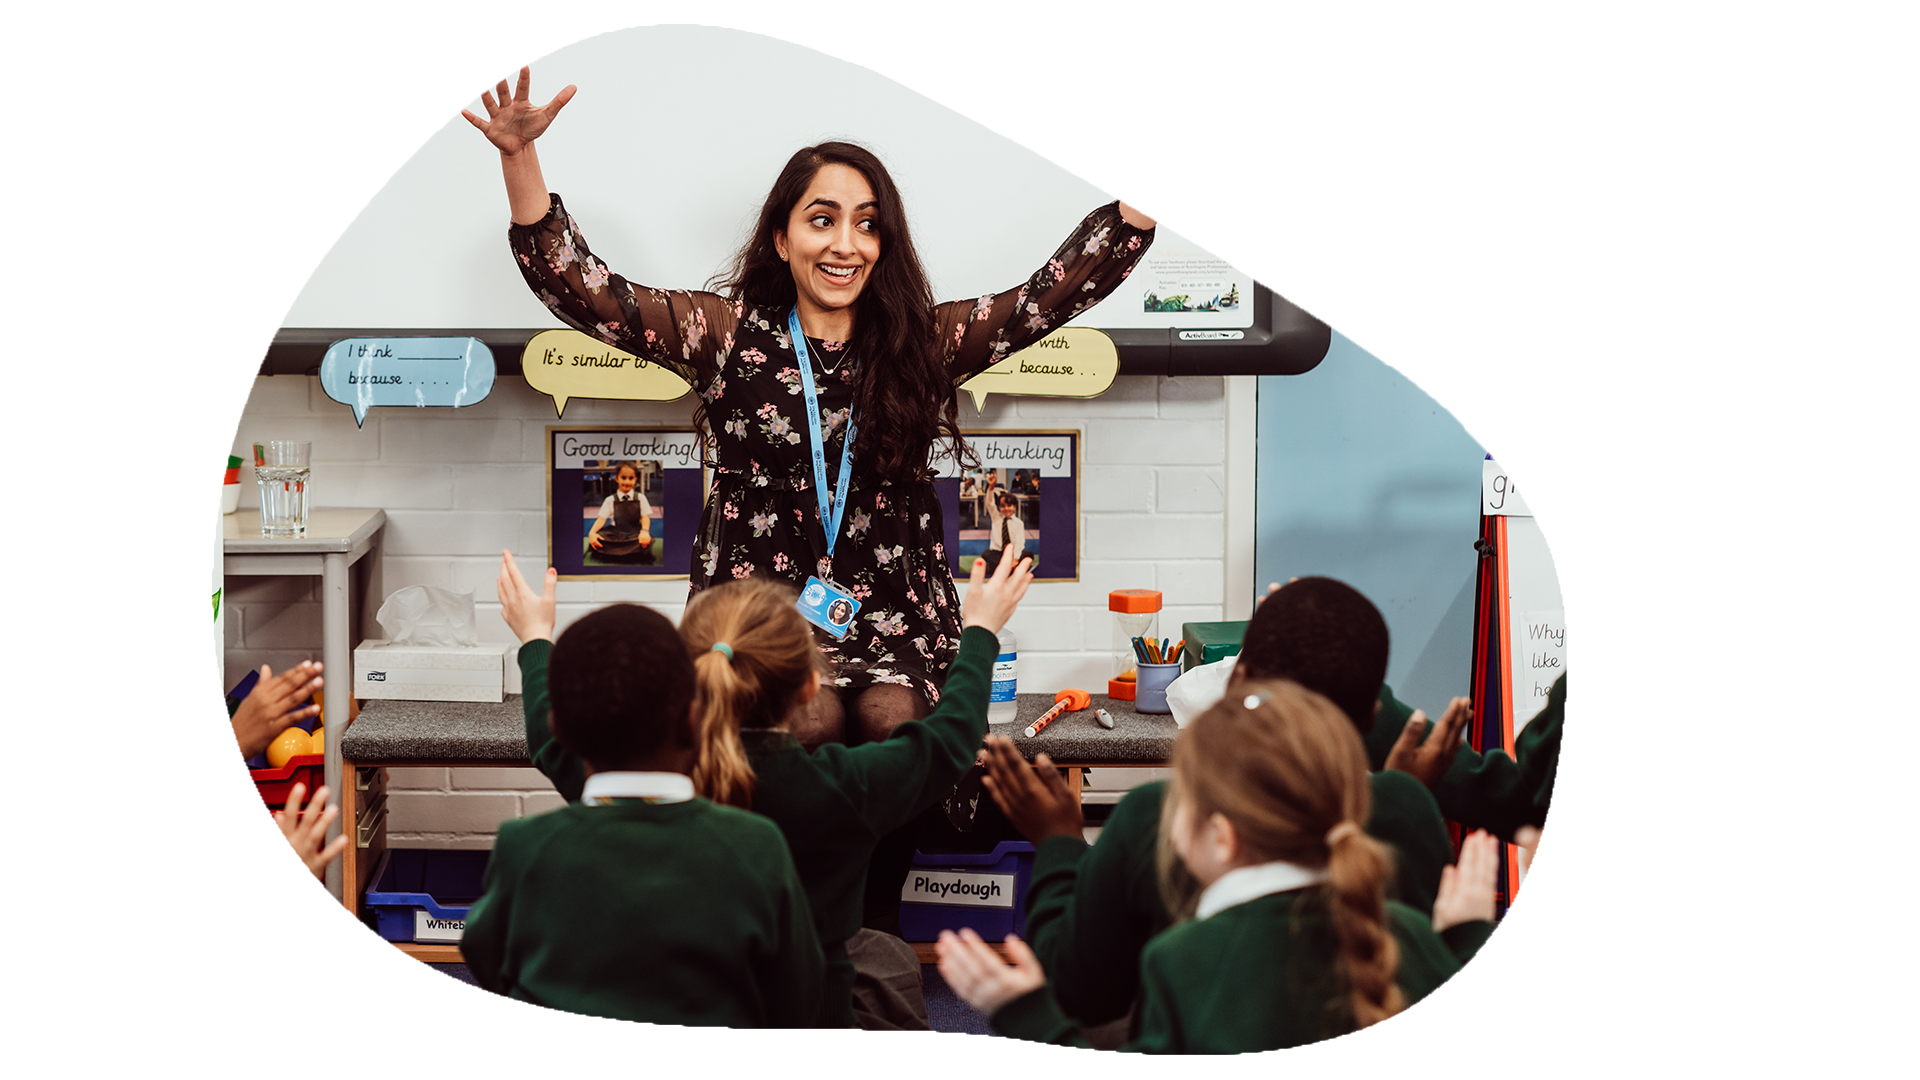 A joyful teacher with outstretched arms stands in front of a classroom, engaging with young students in green uniforms who are enthusiastically raising their hands, creating a lively and interactive learning environment. The classroom is adorned with educational materials, reflecting a focus on creative and active participation.